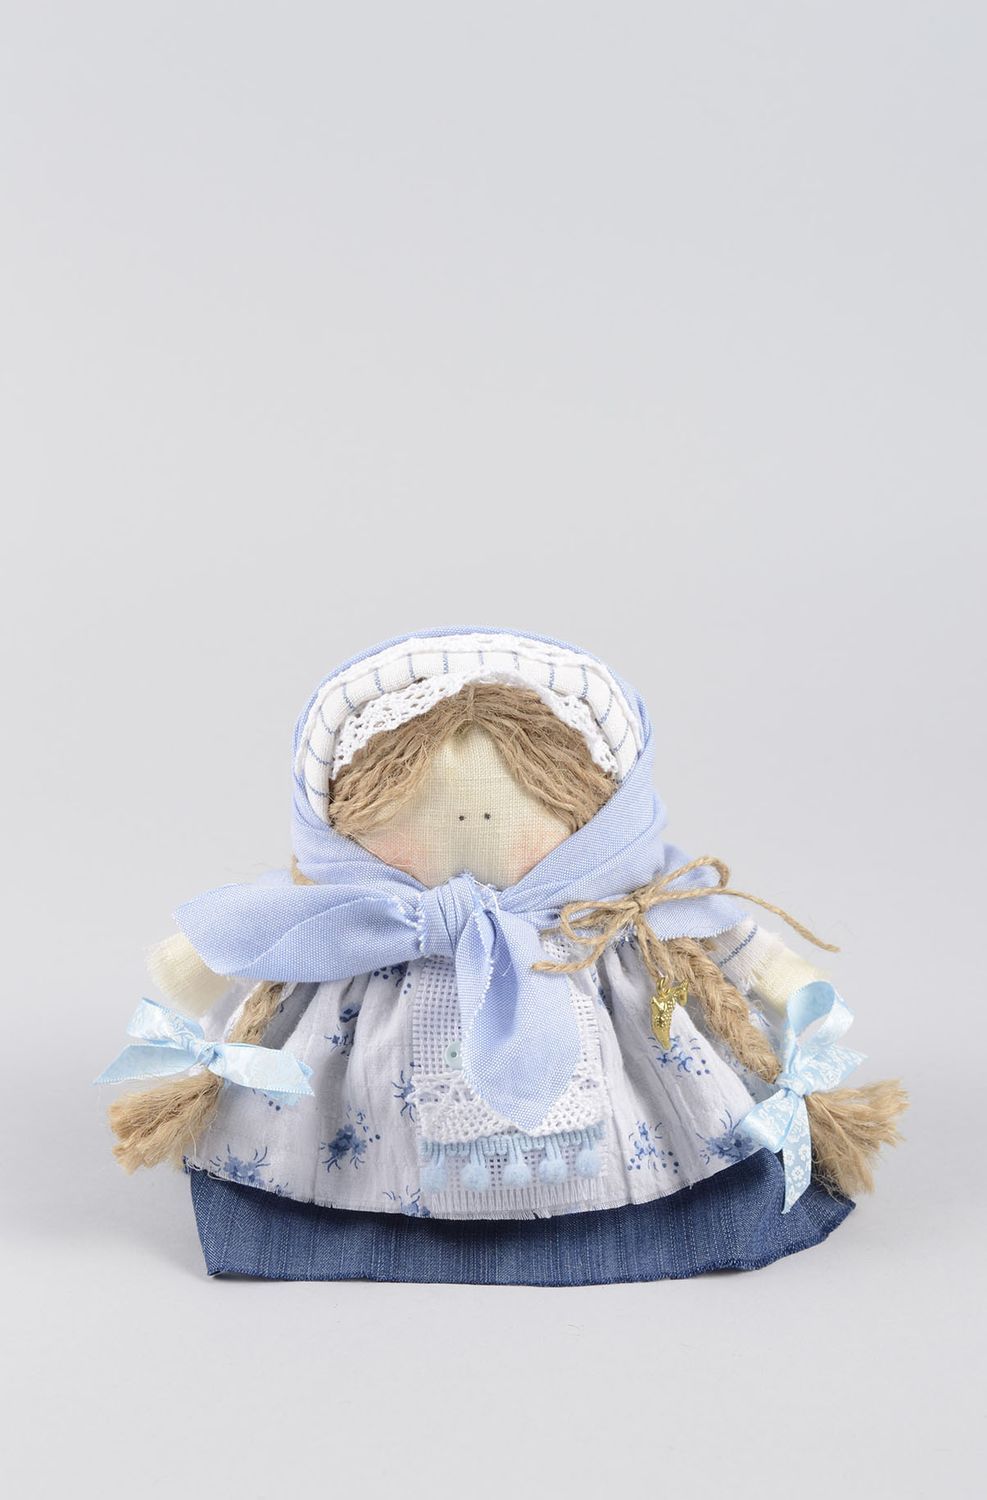 Handmade doll decorative use only unusual toy soft toy for children decor ideas photo 1